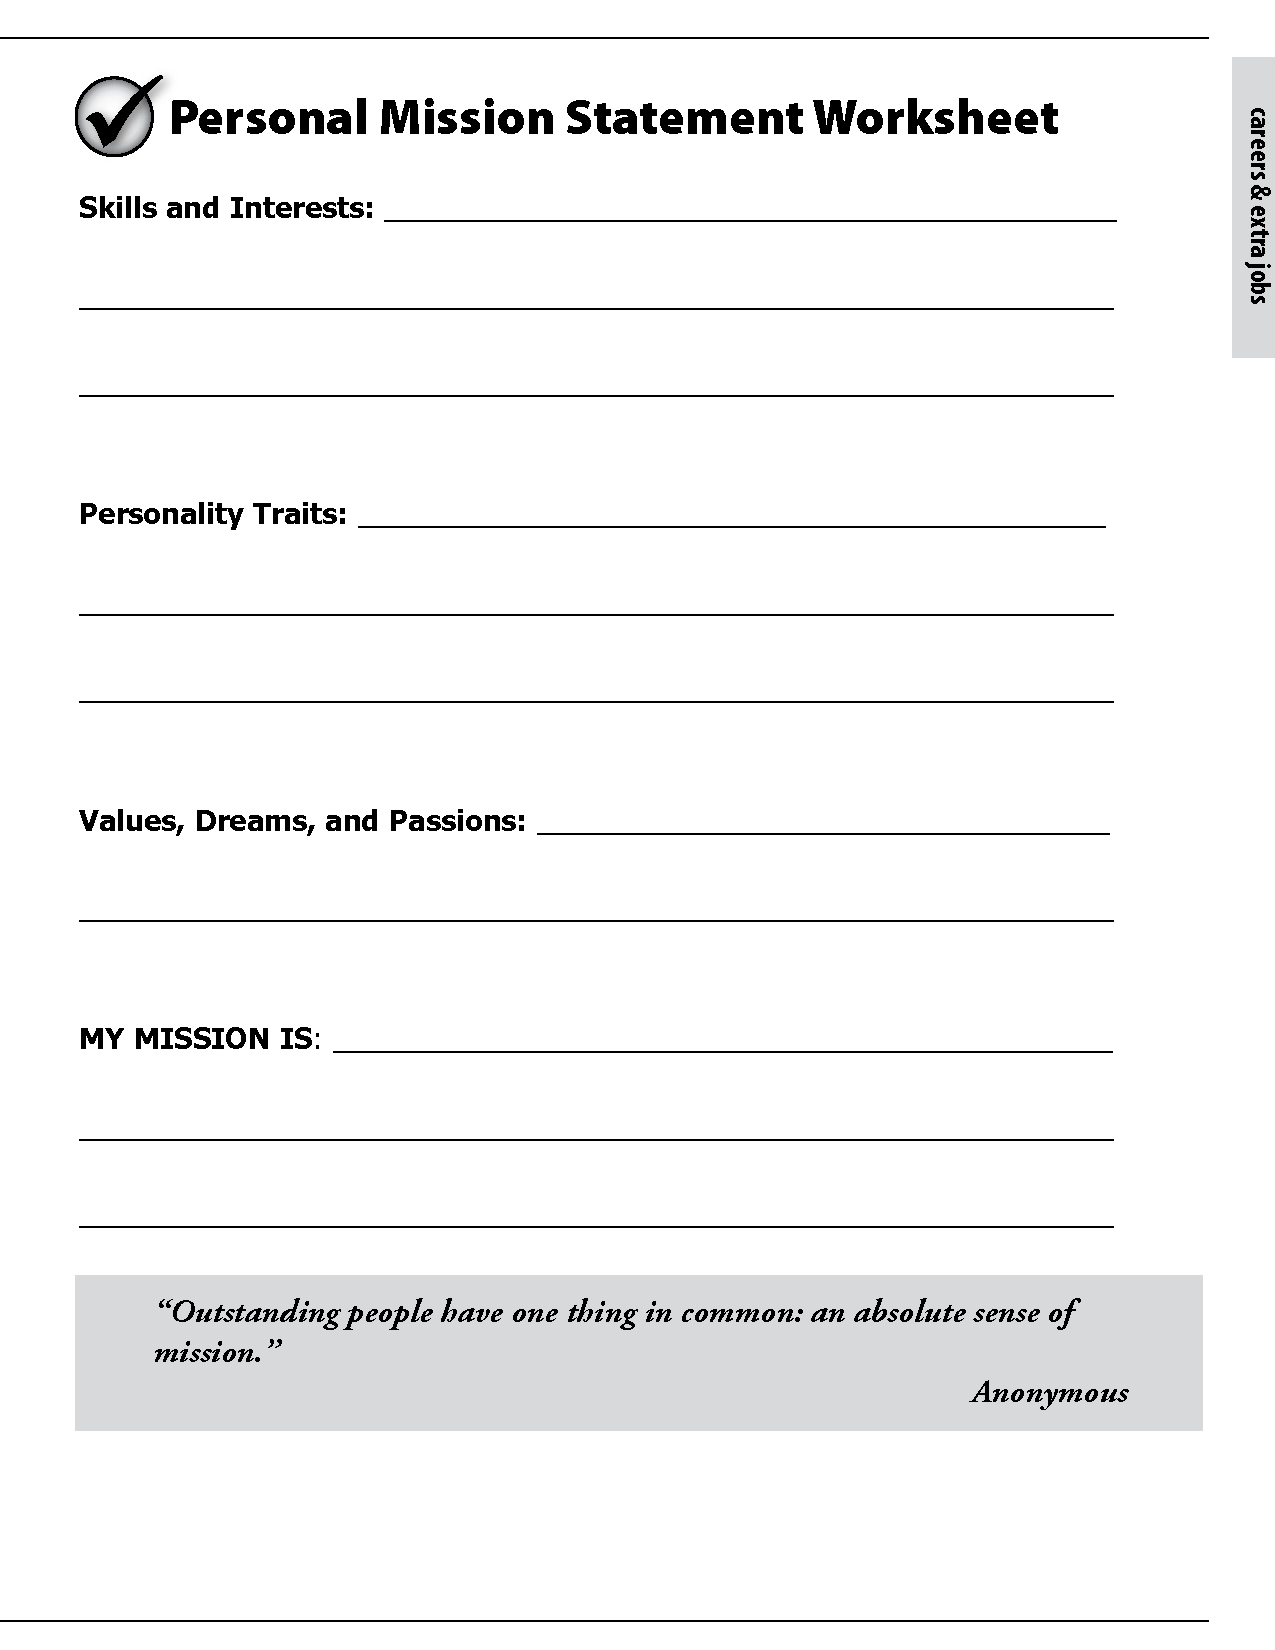 16 Automatic Thoughts Worksheet / worksheeto.com